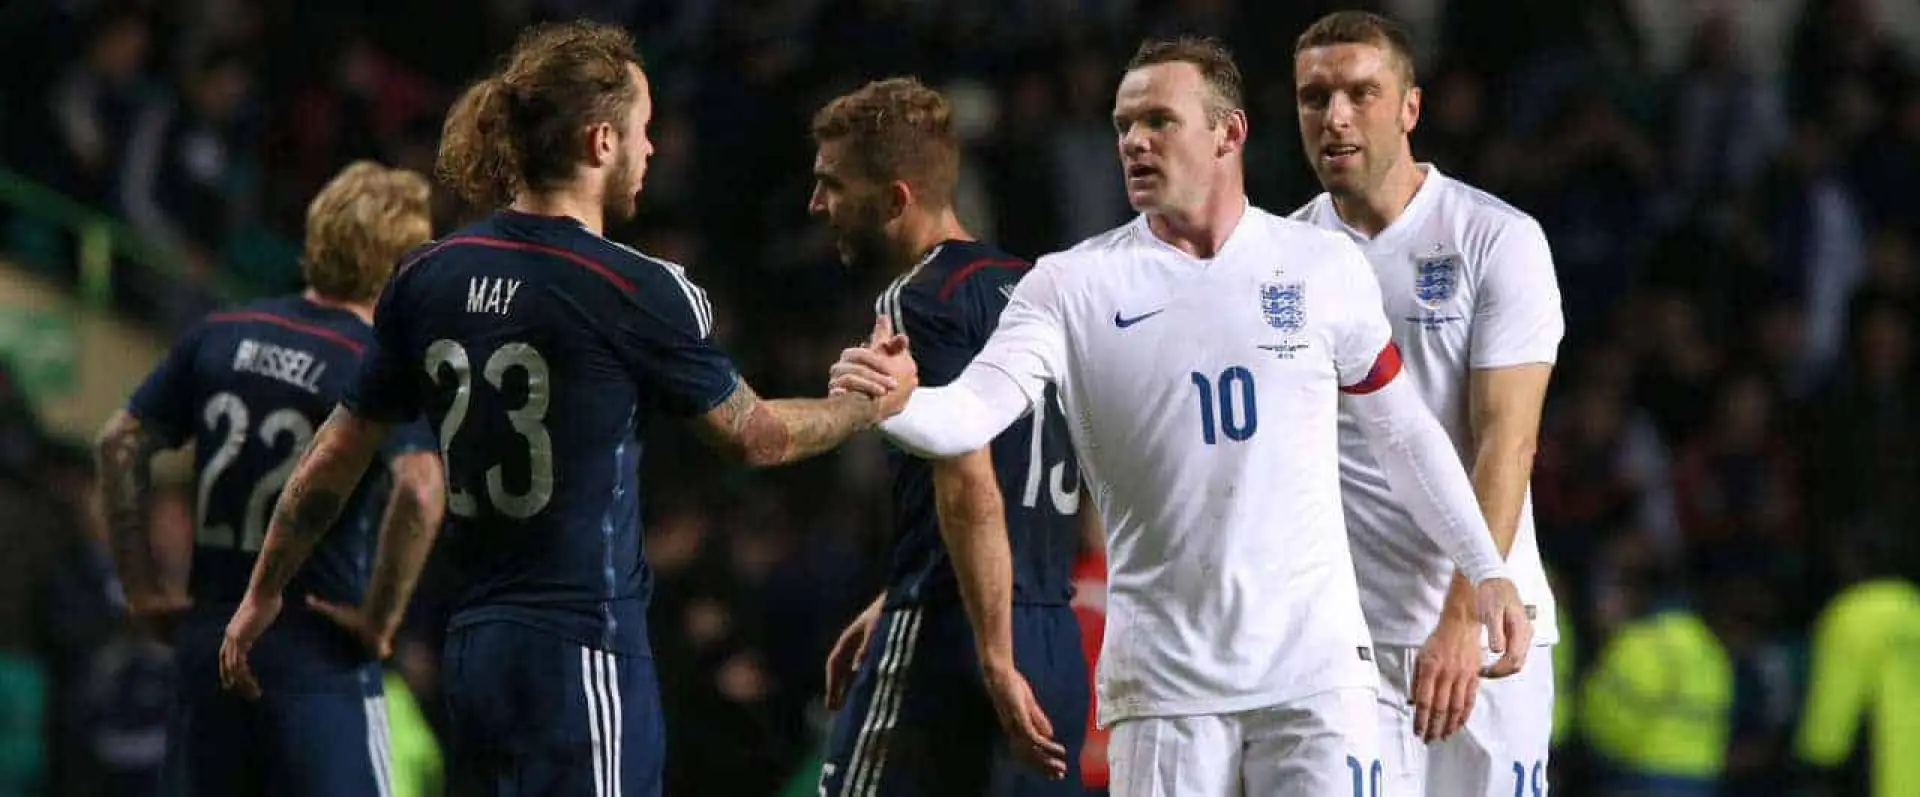 England v Scotland bets and an eighfold acca feature among Coral football experts' World Cup qualifying tips for November 11.